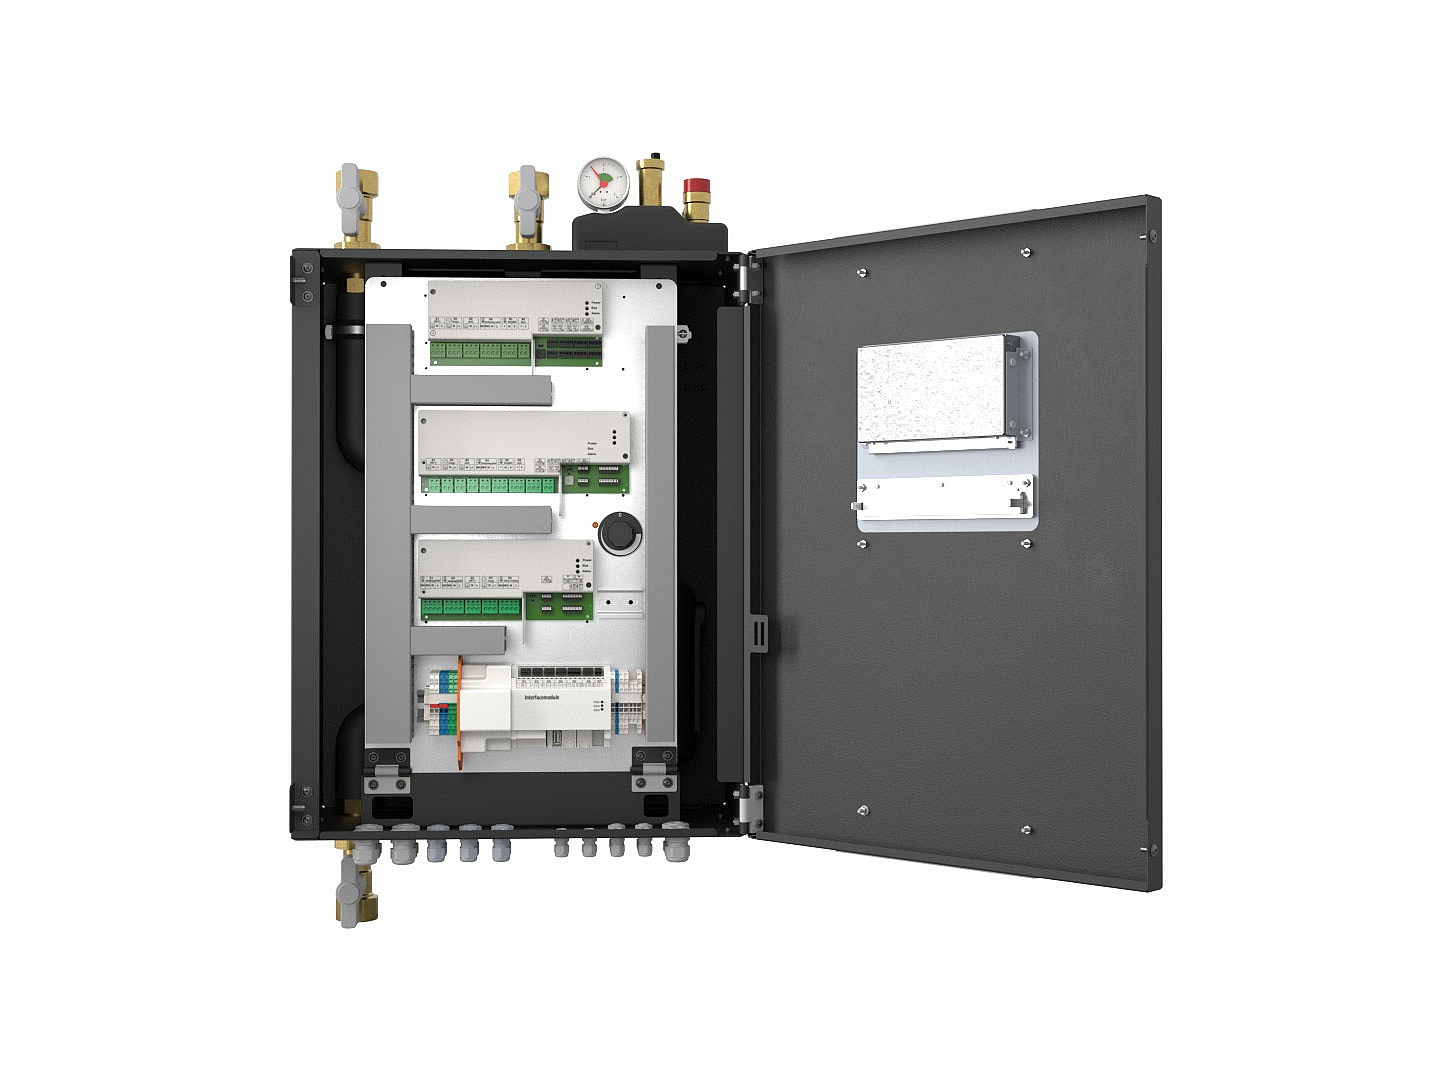 The Hydrobox pro is the central control unit for the provision and distribution of heat energy in the heating system.